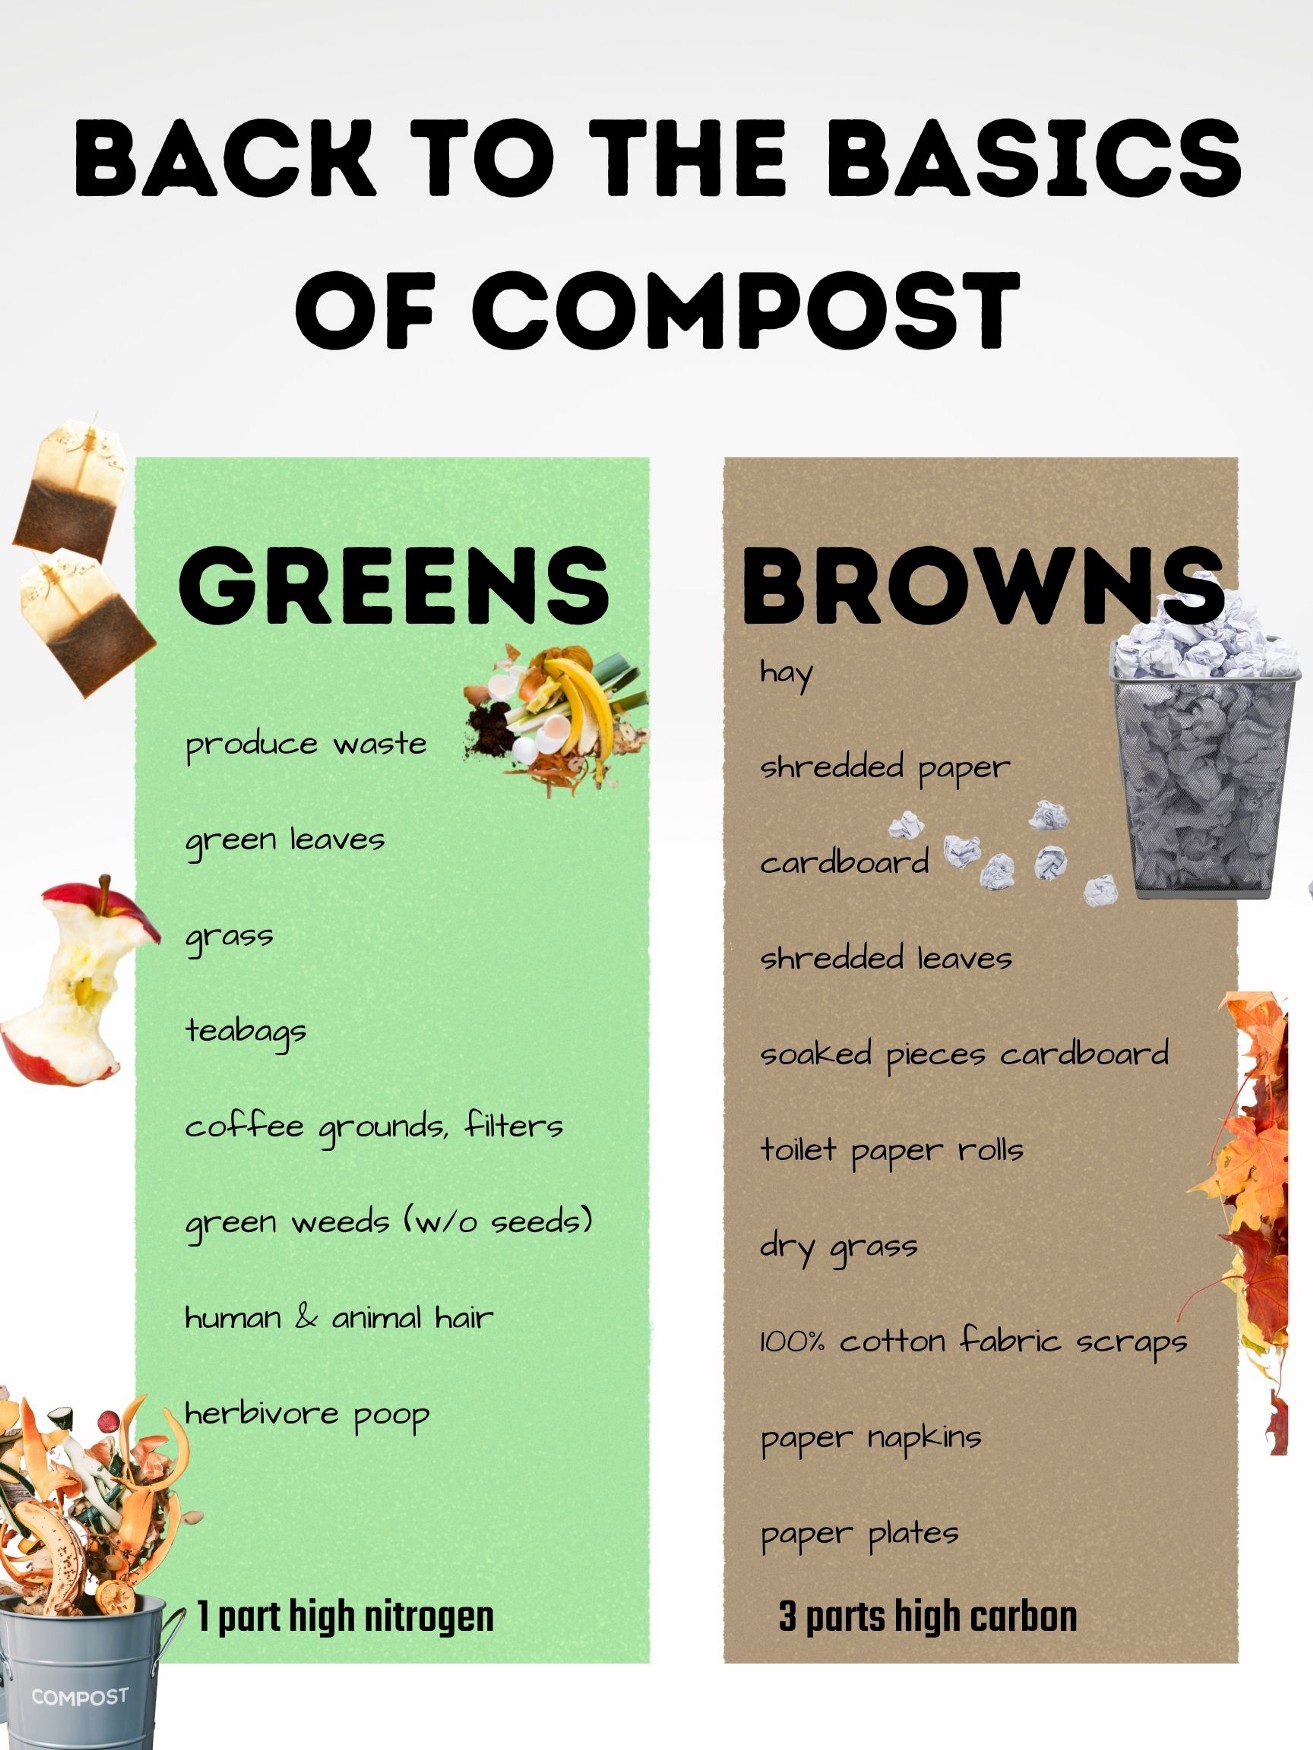 list of composting materials separated by greens and browns